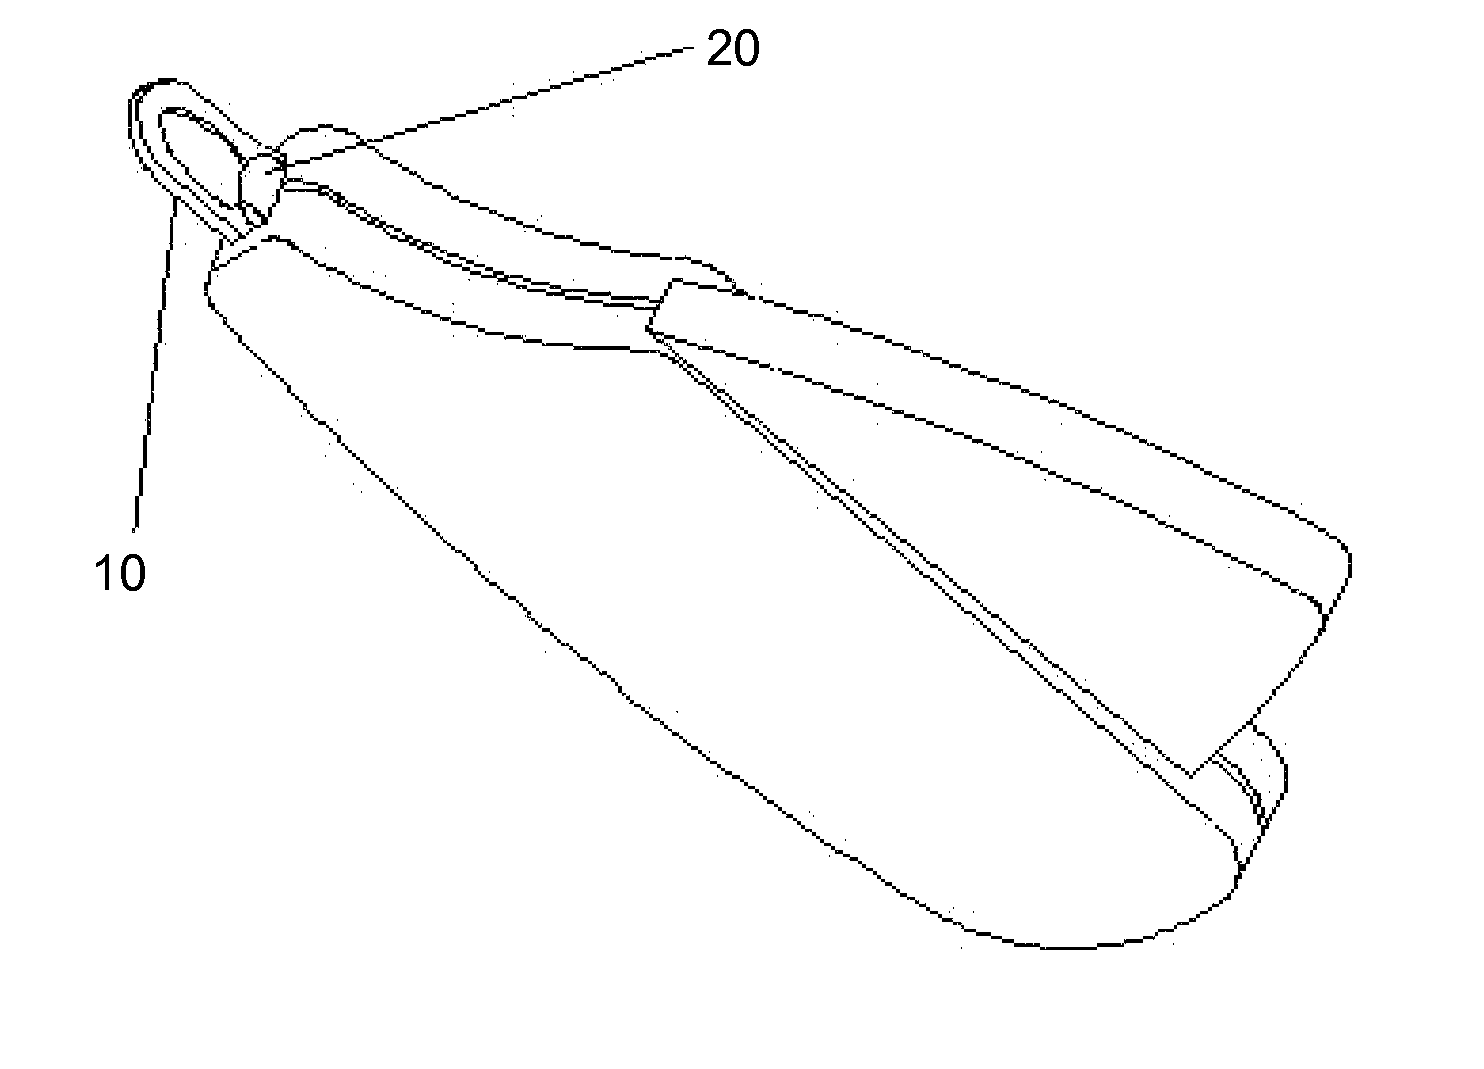 Nail and claw quick detection apparatus and method